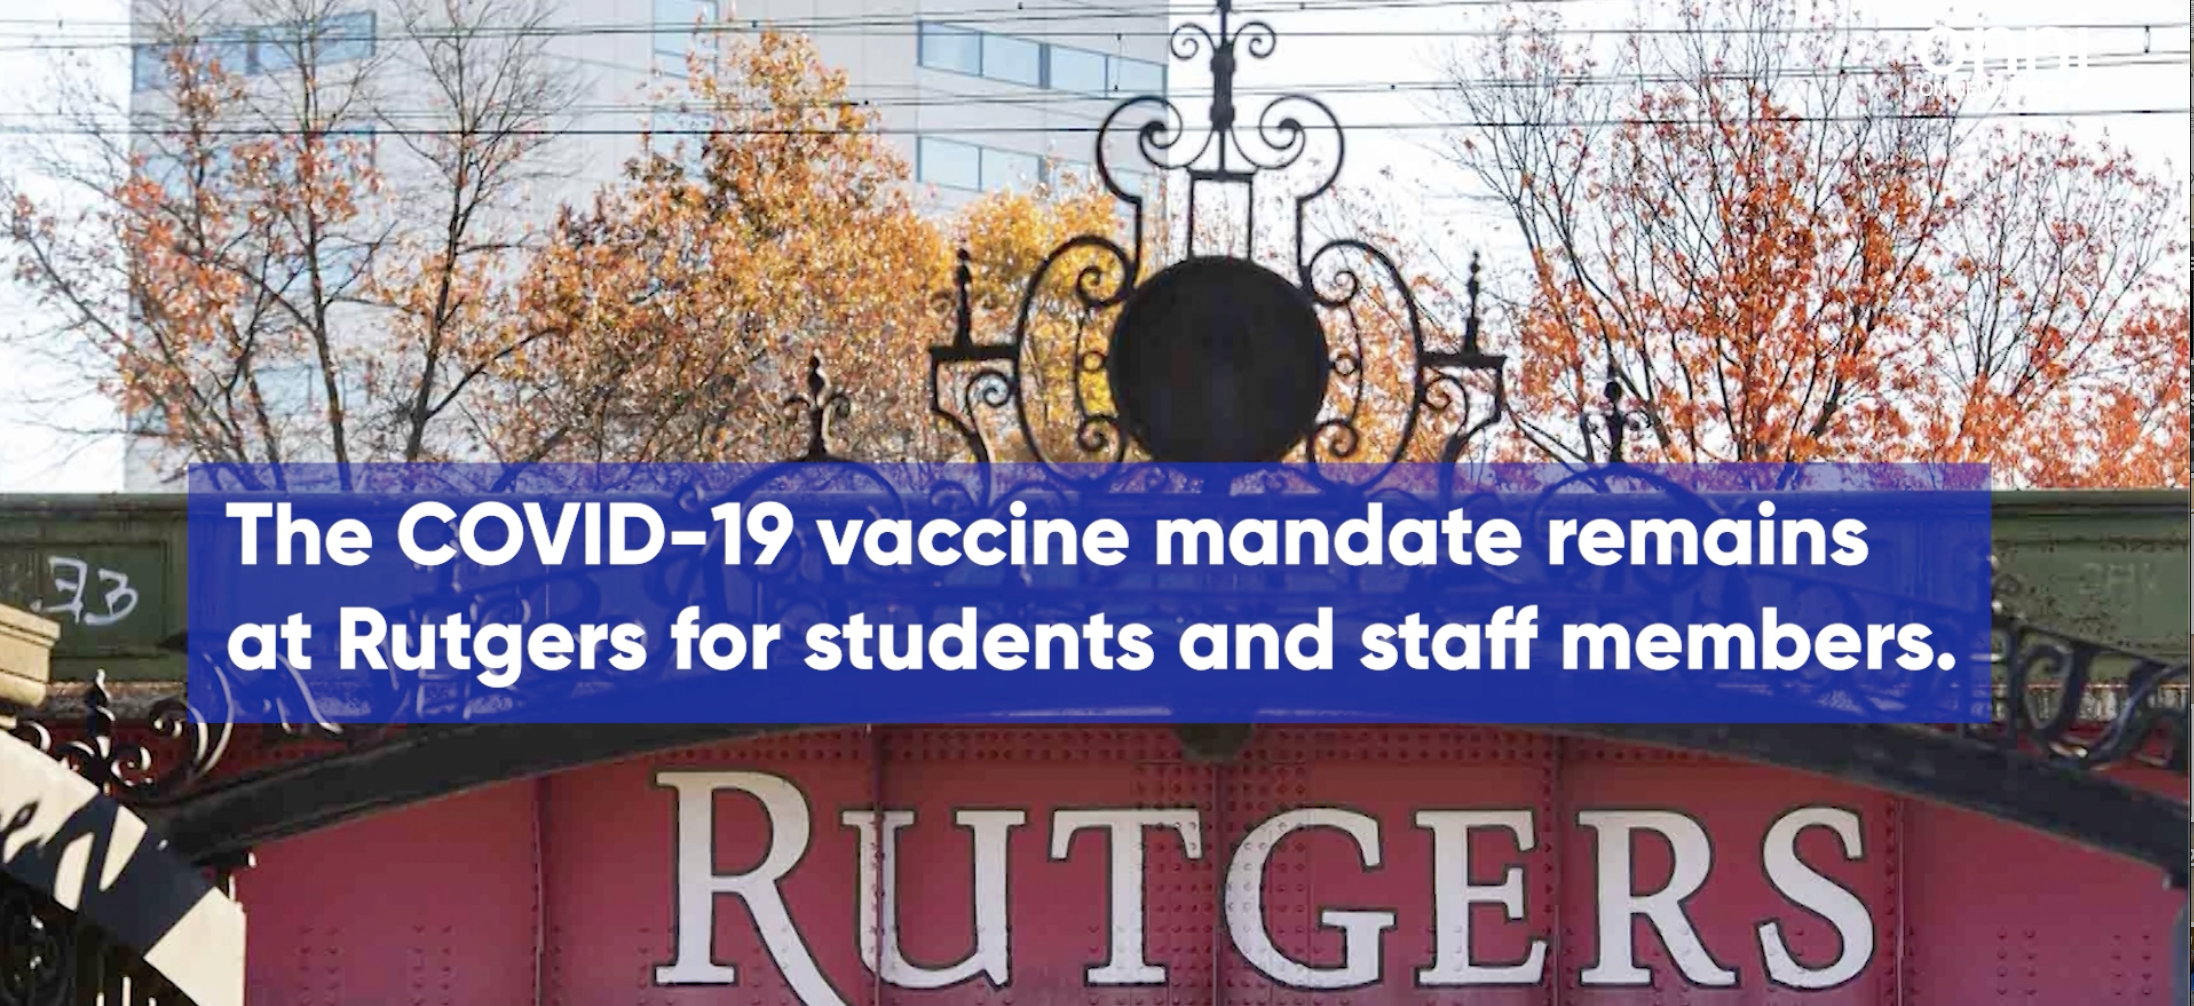 Rutgers University Will Require the COVID-19 Vaccine for Students...